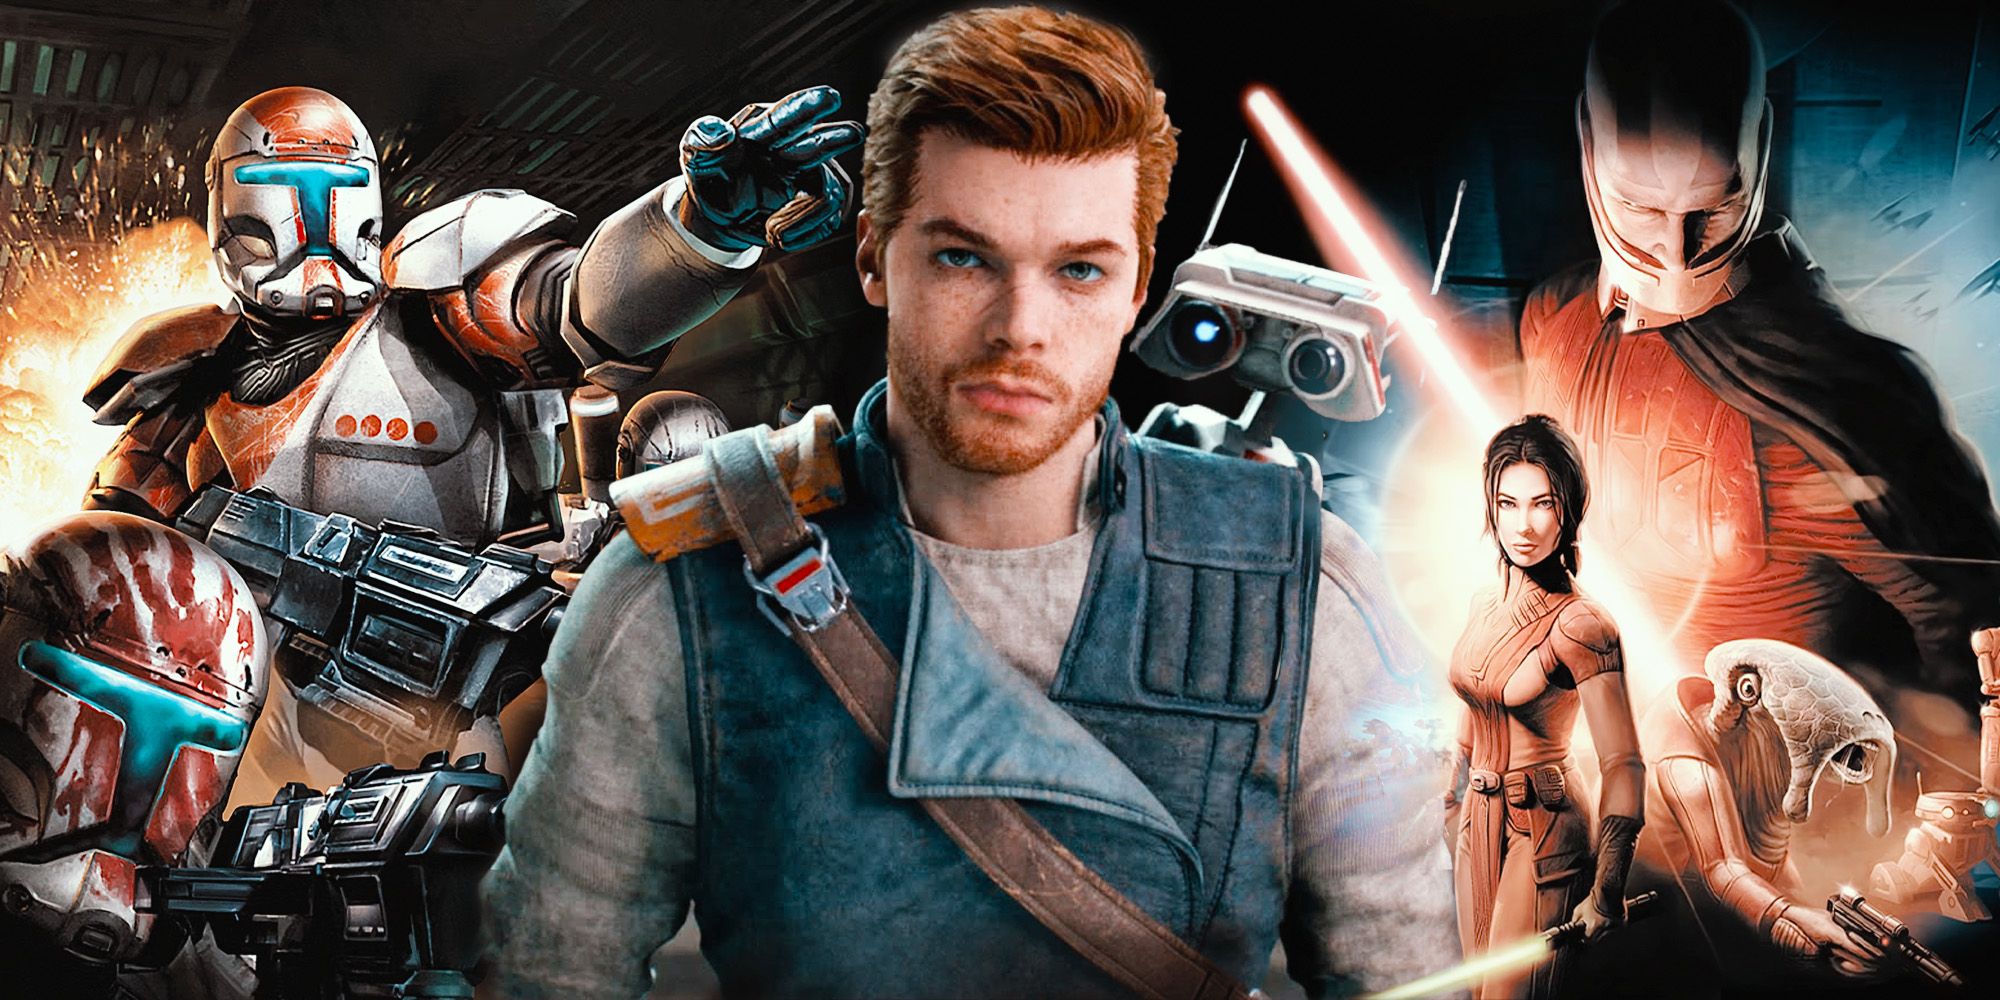 Upcoming Star Wars games: Every new Star Wars game announced so